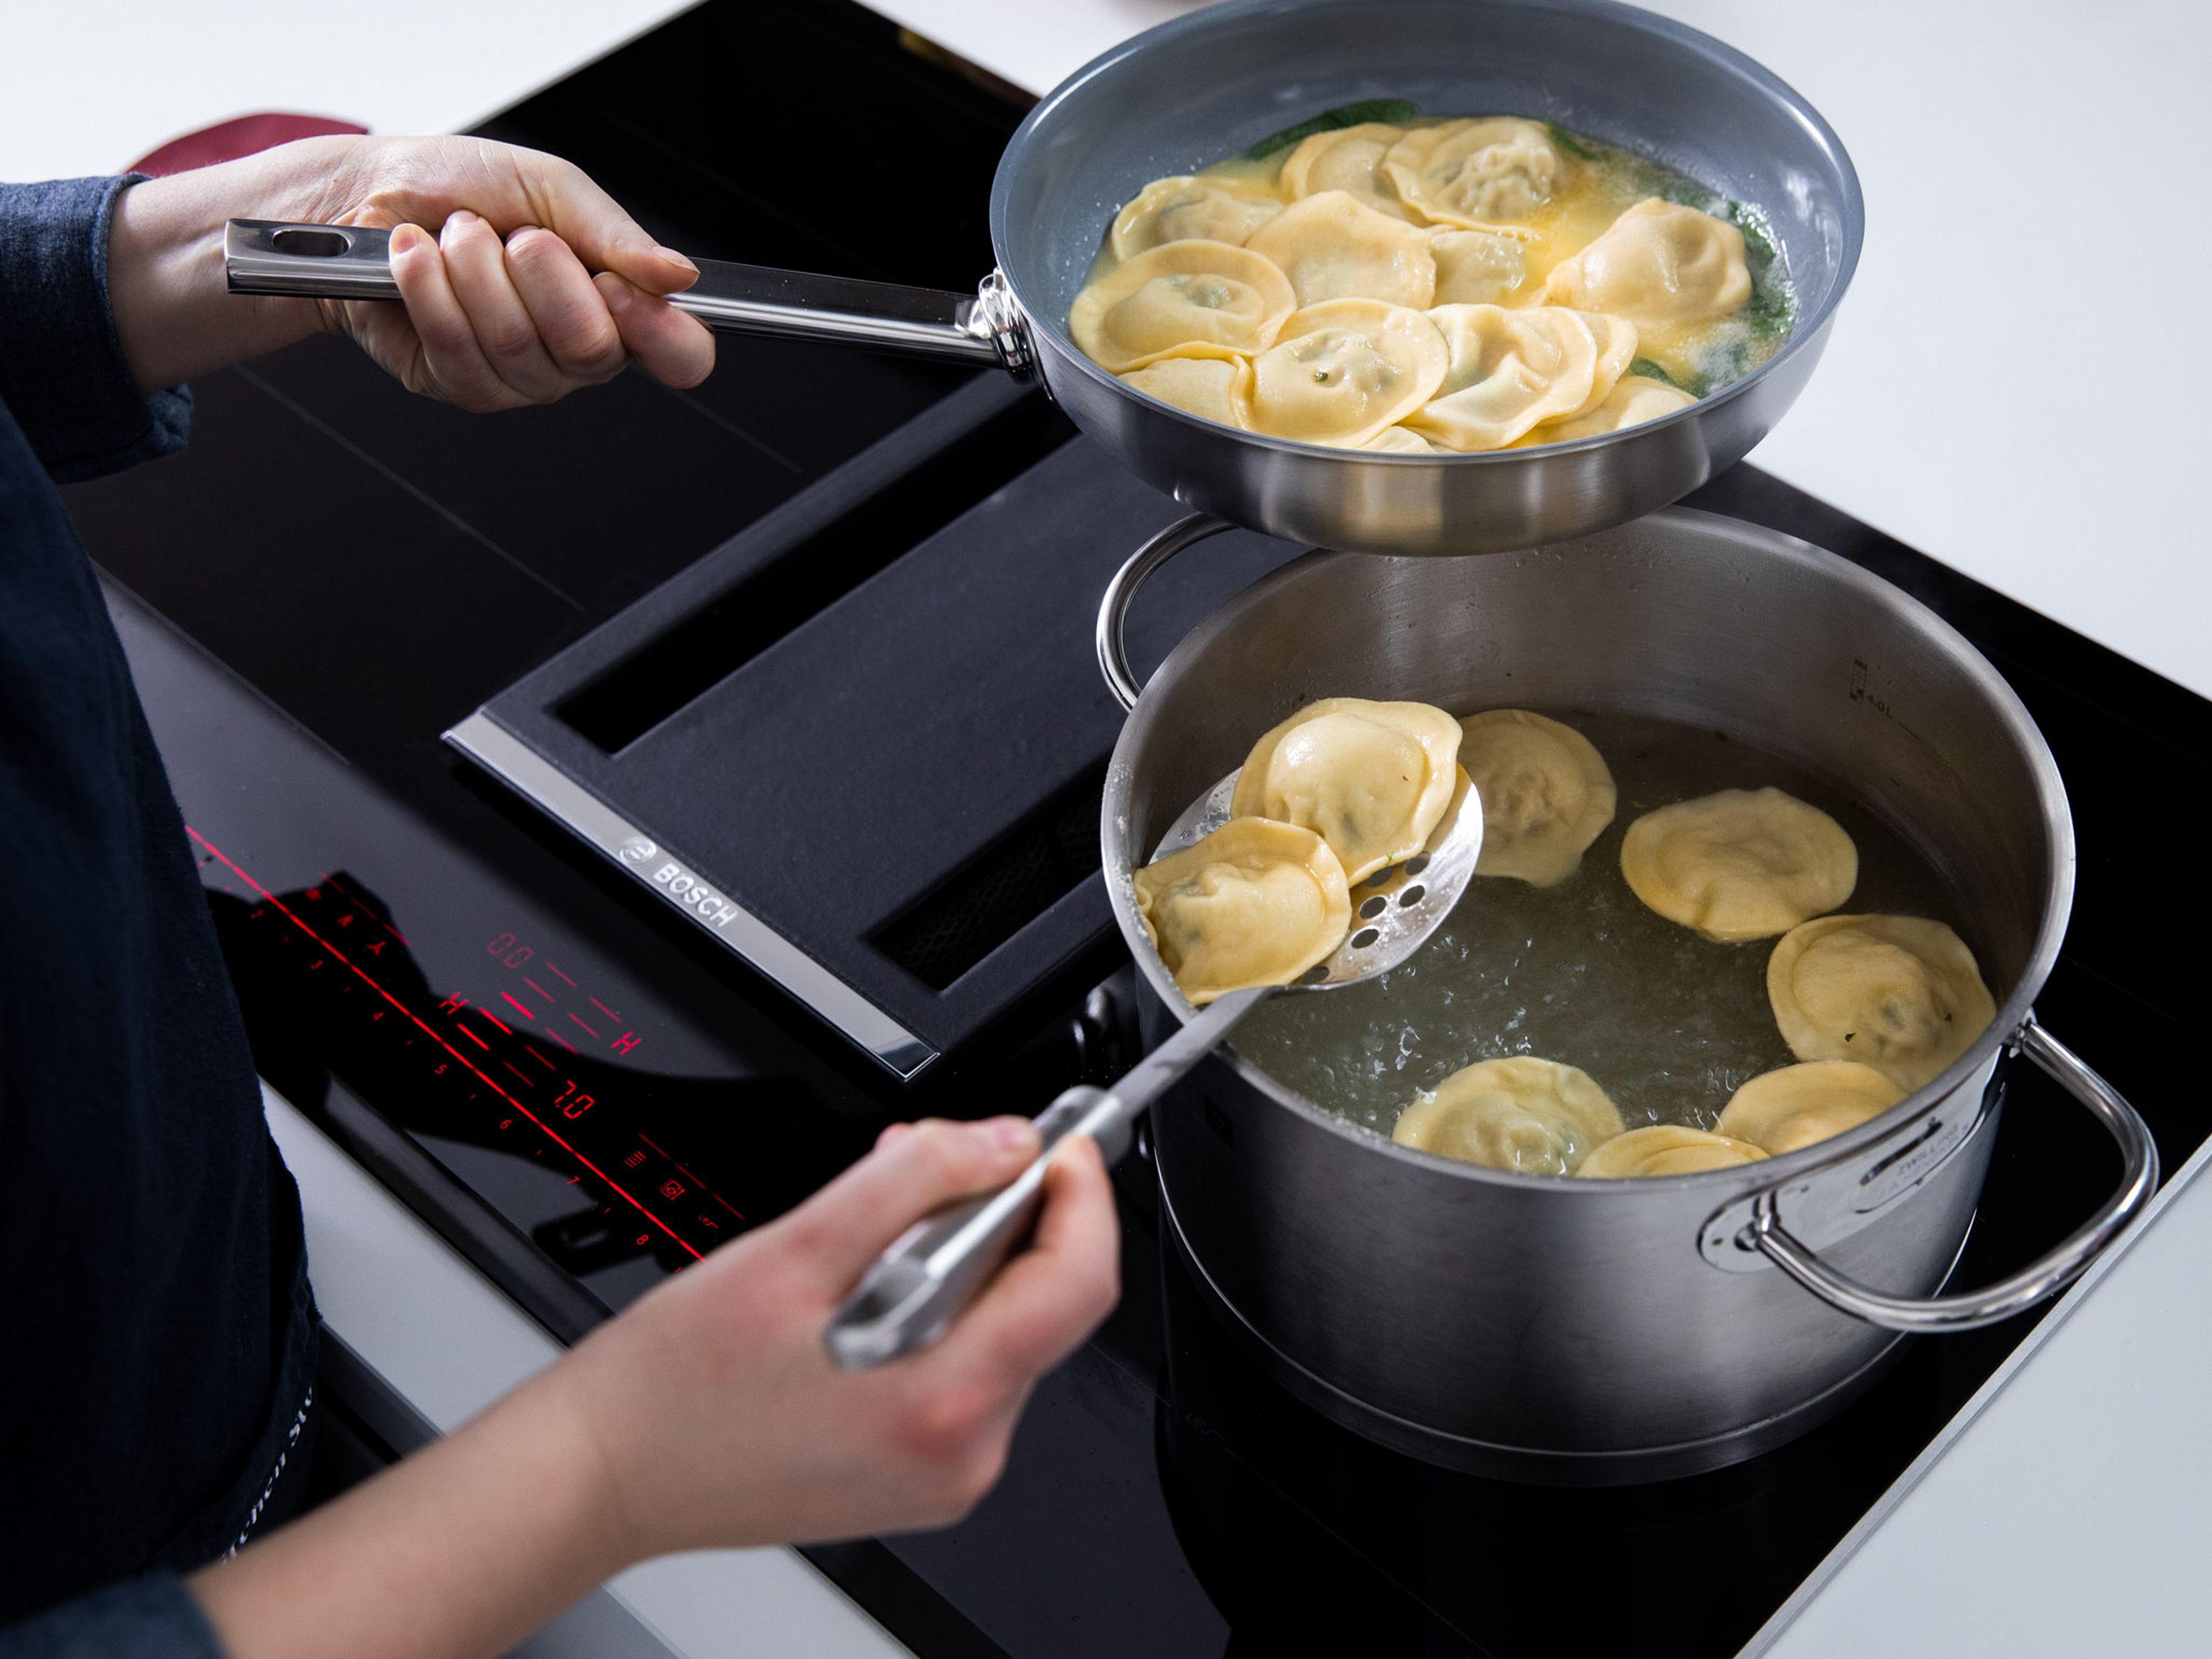 Bring a large pot water to a boil, salt well, and cook ravioli for approx. 5 min. In the meantime, melt butter in a large frying pan and add sage leaves and a ladle of cooking water from the ravioli. Add ravioli to the frying pan and toss to coat. Serve ravioli with fresh mint and black pepper. Enjoy!